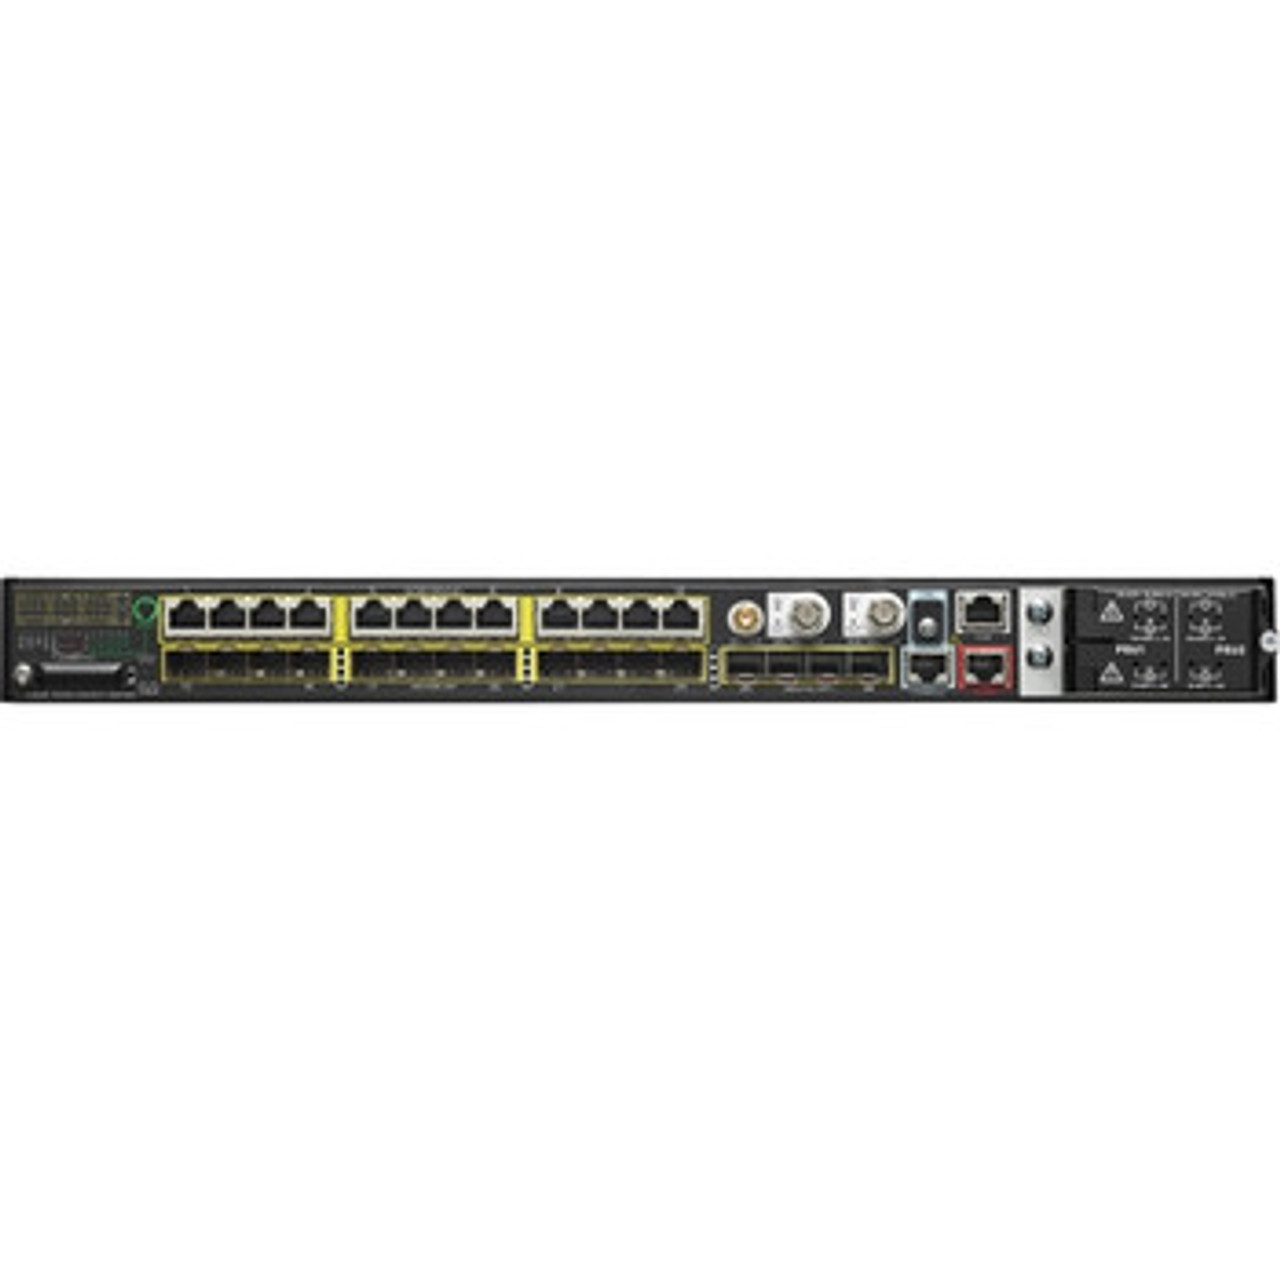 IE-5000-12S12P-10G | Cisco | IE-5000 12-Ports 10/100/1000M PoE+ Manageable Rack-Mountable 1U Ethernet Switch with 16x SFP and SFP+ Ports